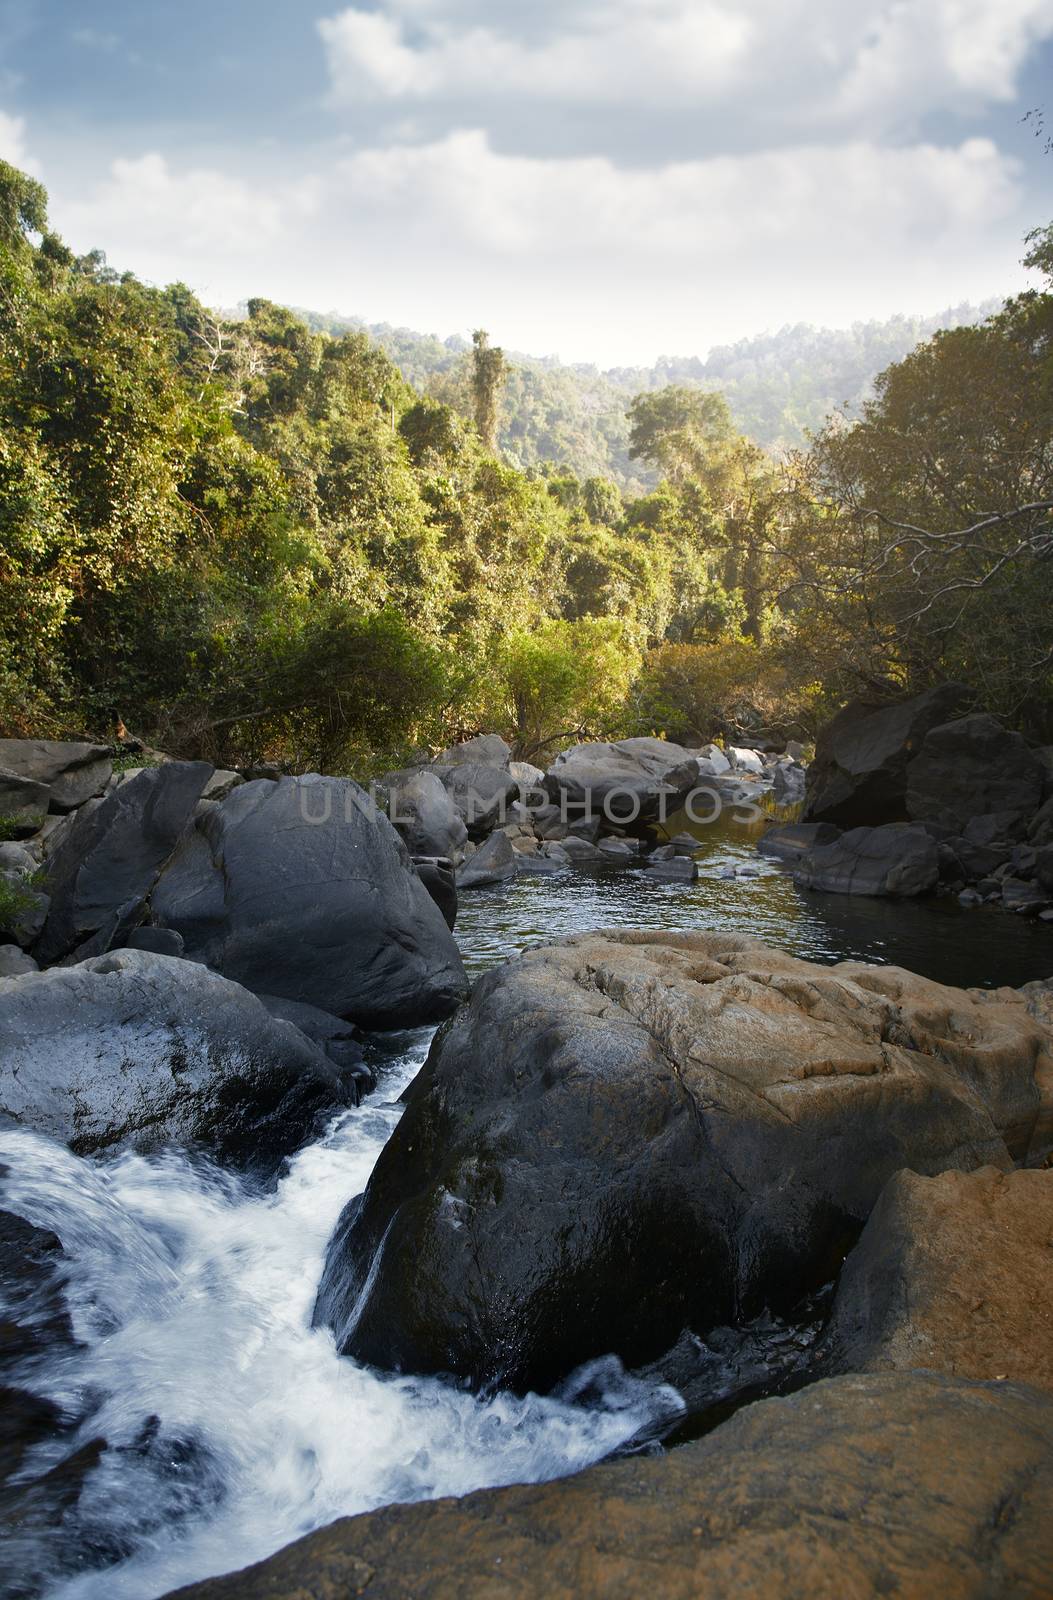 Indian jungle with shallow river between stones by Novic